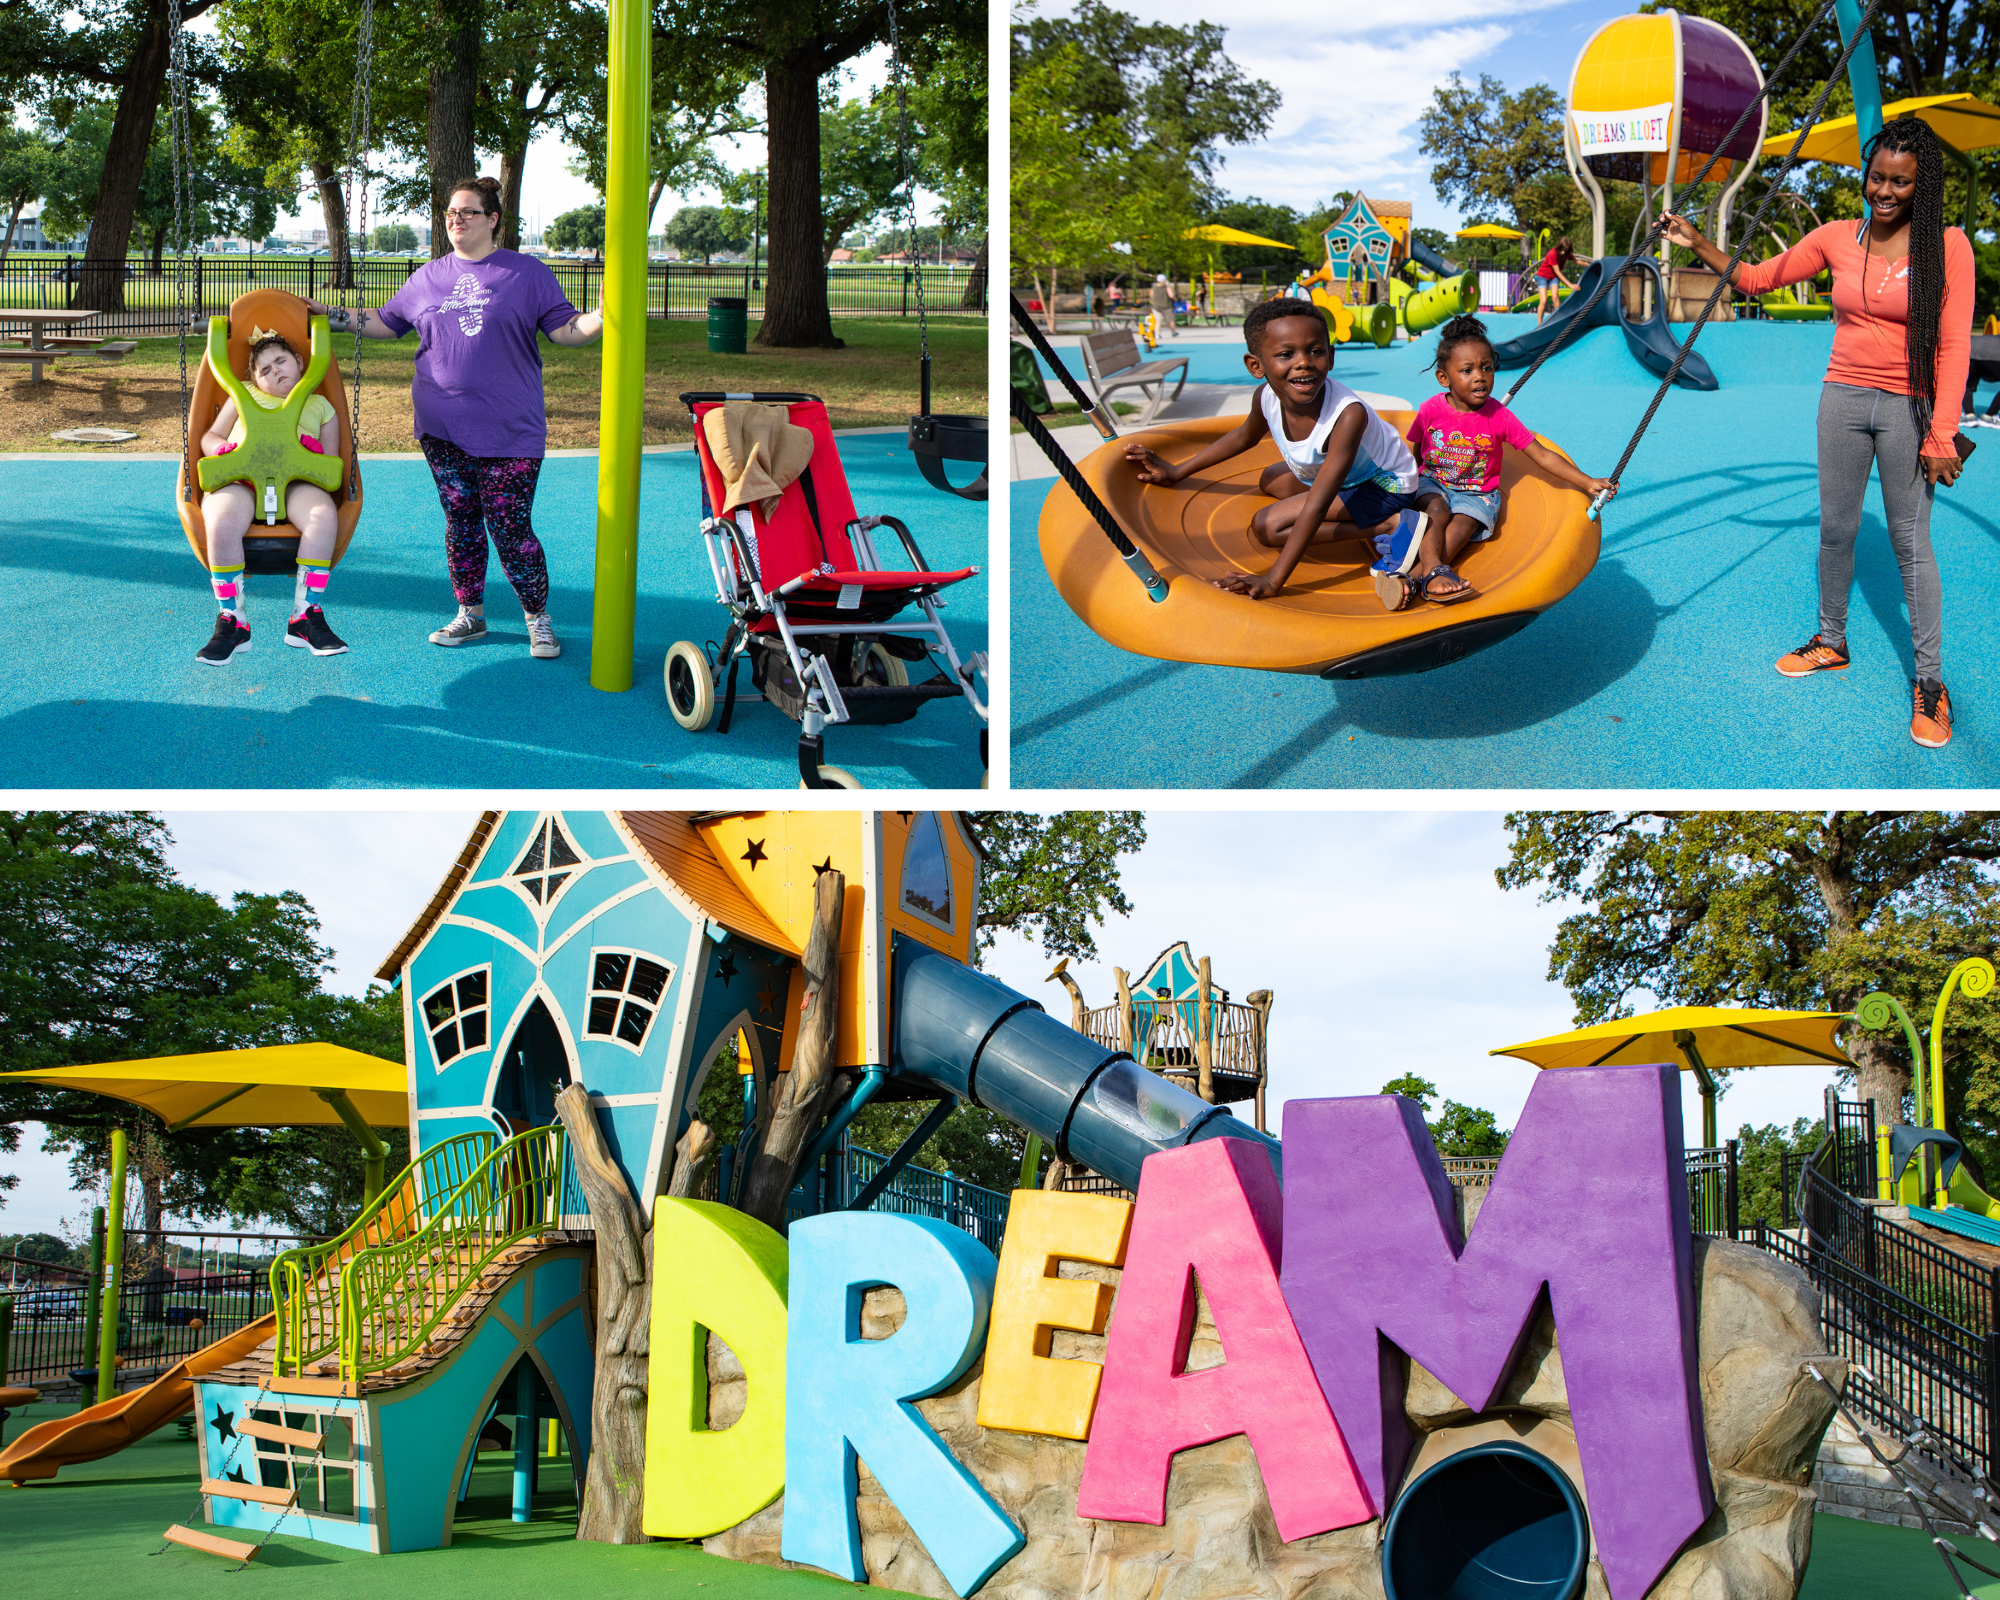 Discover Dream Park in Fort Worth, Texas—a family favorite with inclusive play events, made possible by community-driven playground funding.